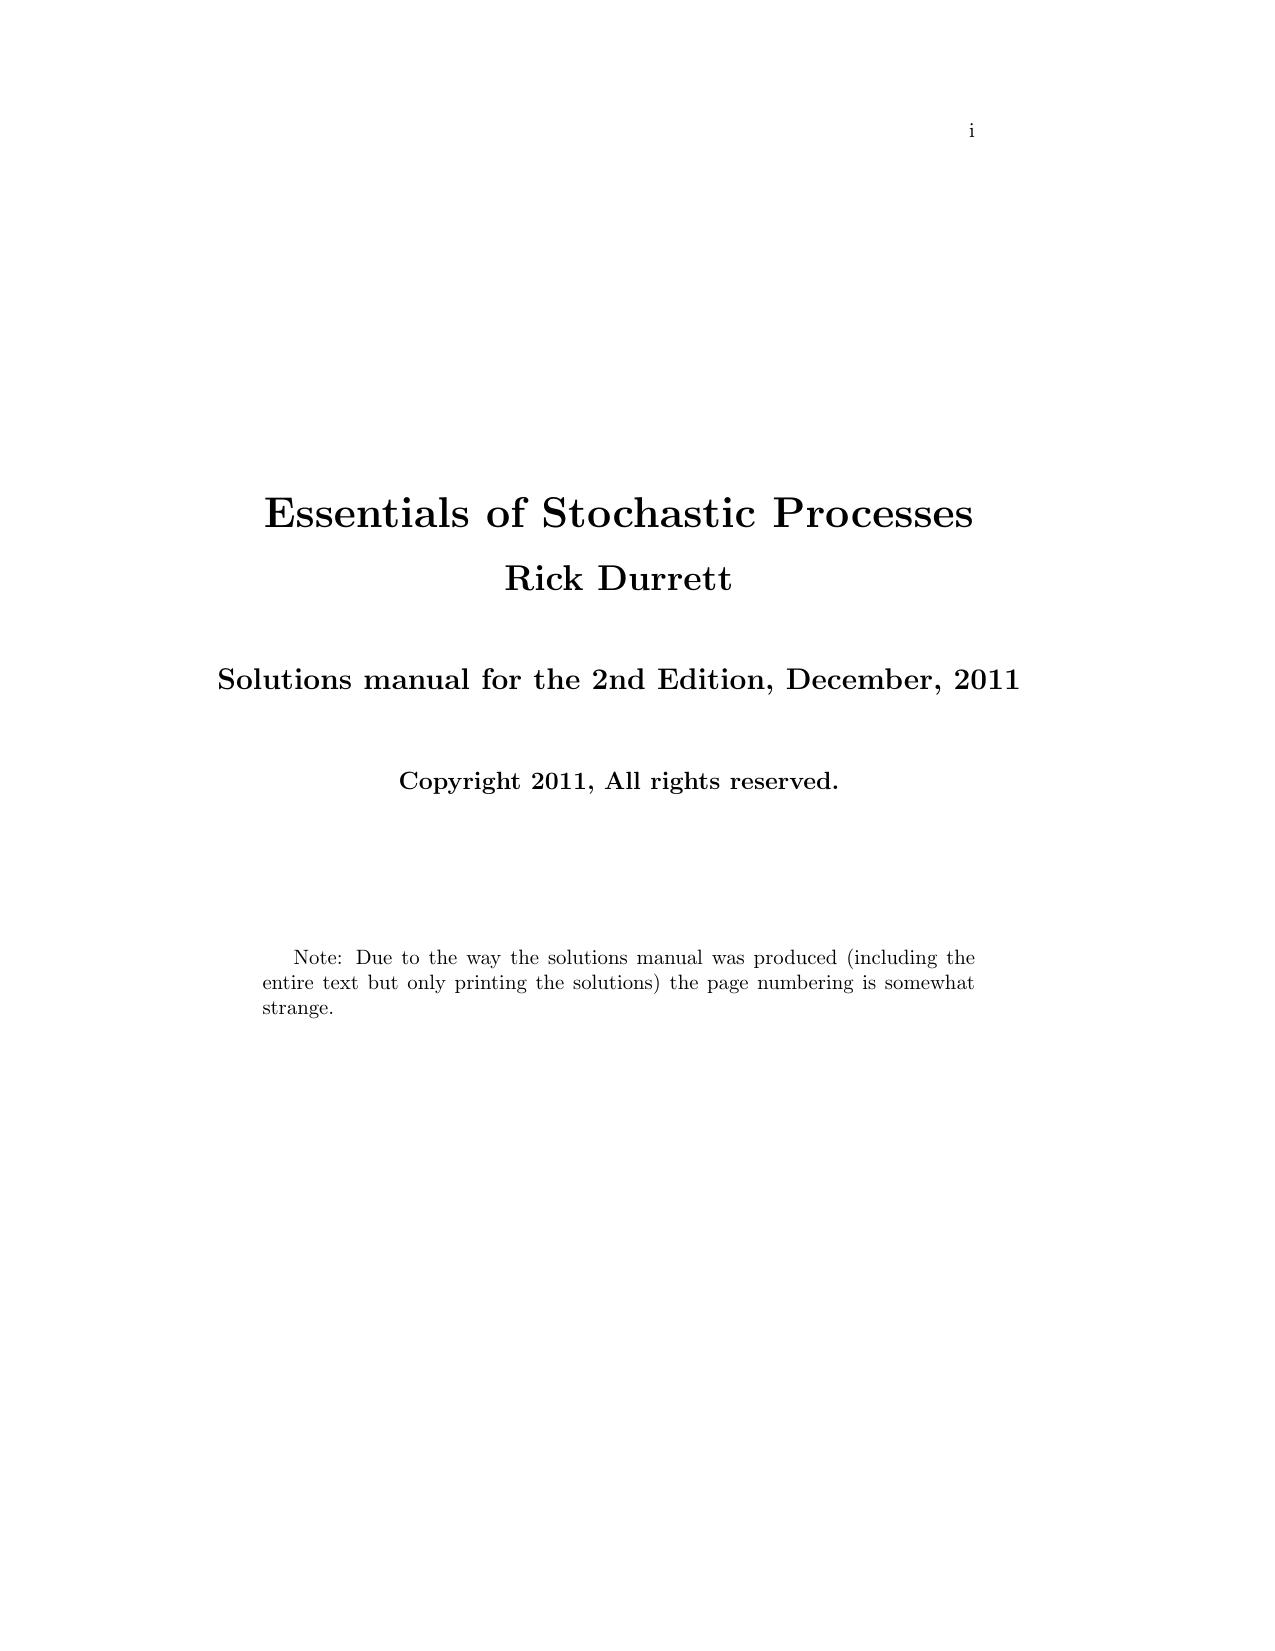 Essentials of Stochastic Processes, Second Edition (Instructor Solution Manual, Solutions) by Richard Durrett